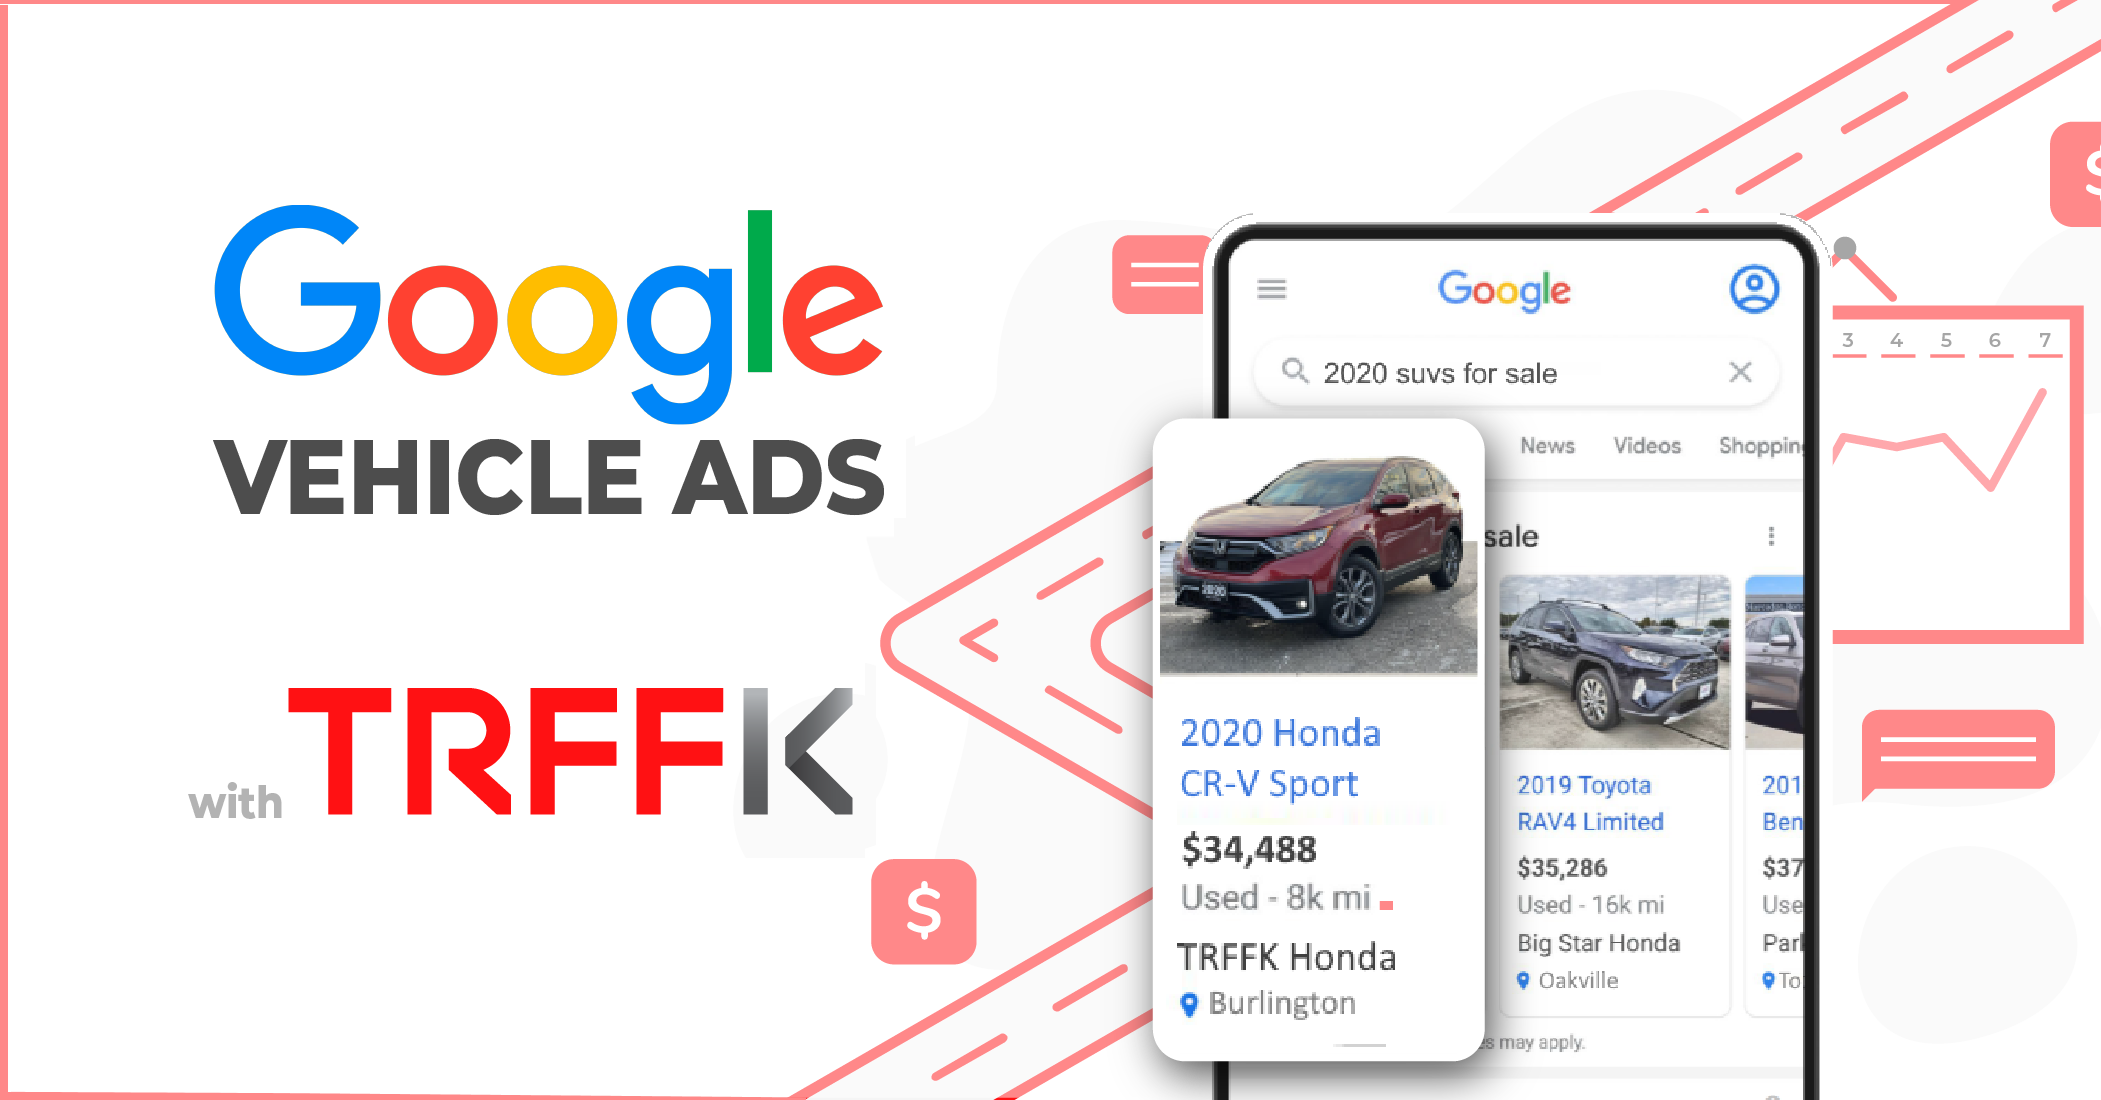 Introducing Google Vehicle Ads by TRFFK